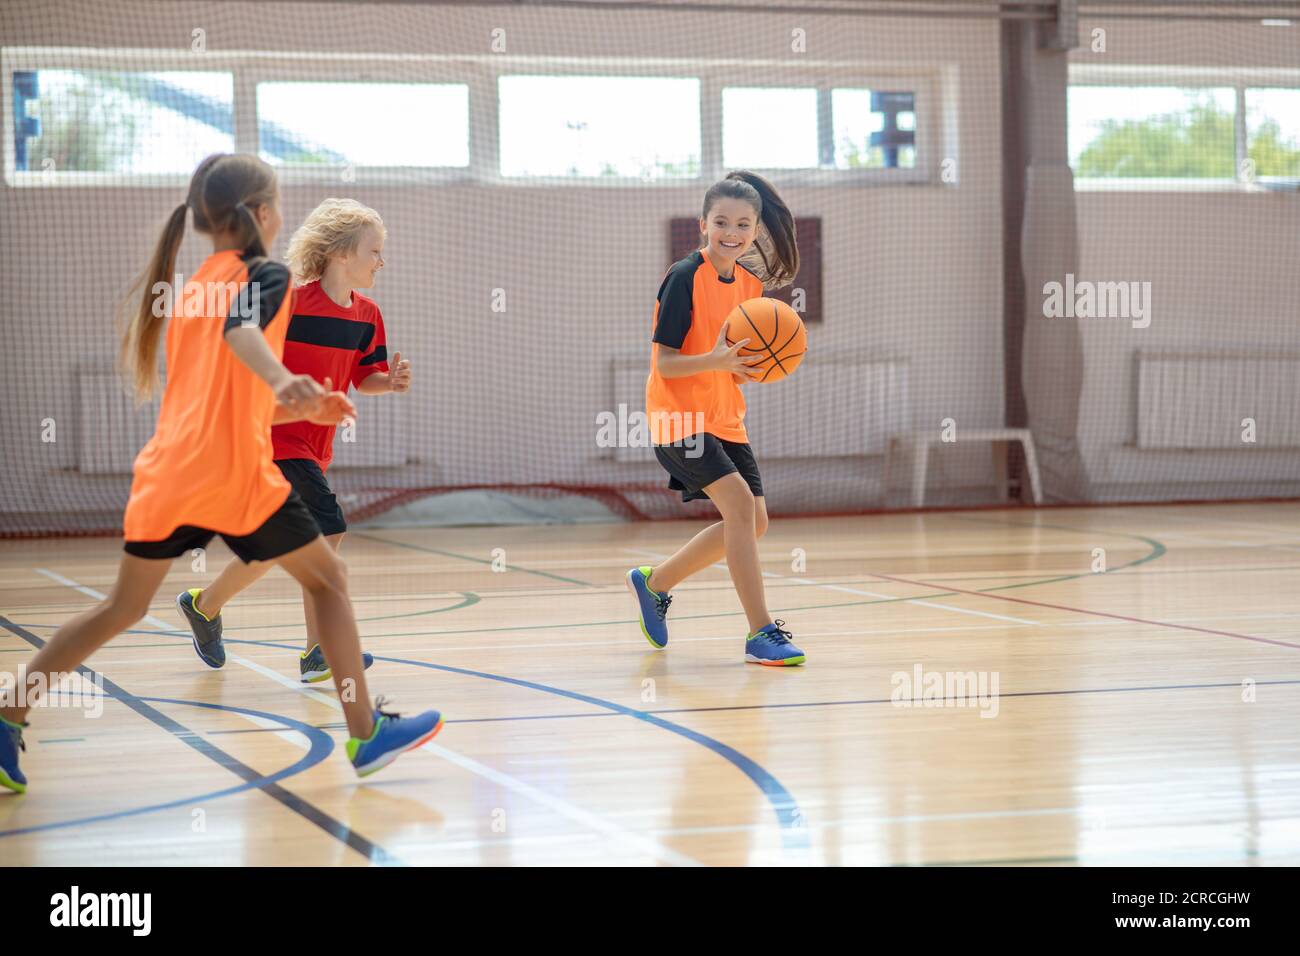 Kids in bright sportswear playing basketball together and running Stock Photo